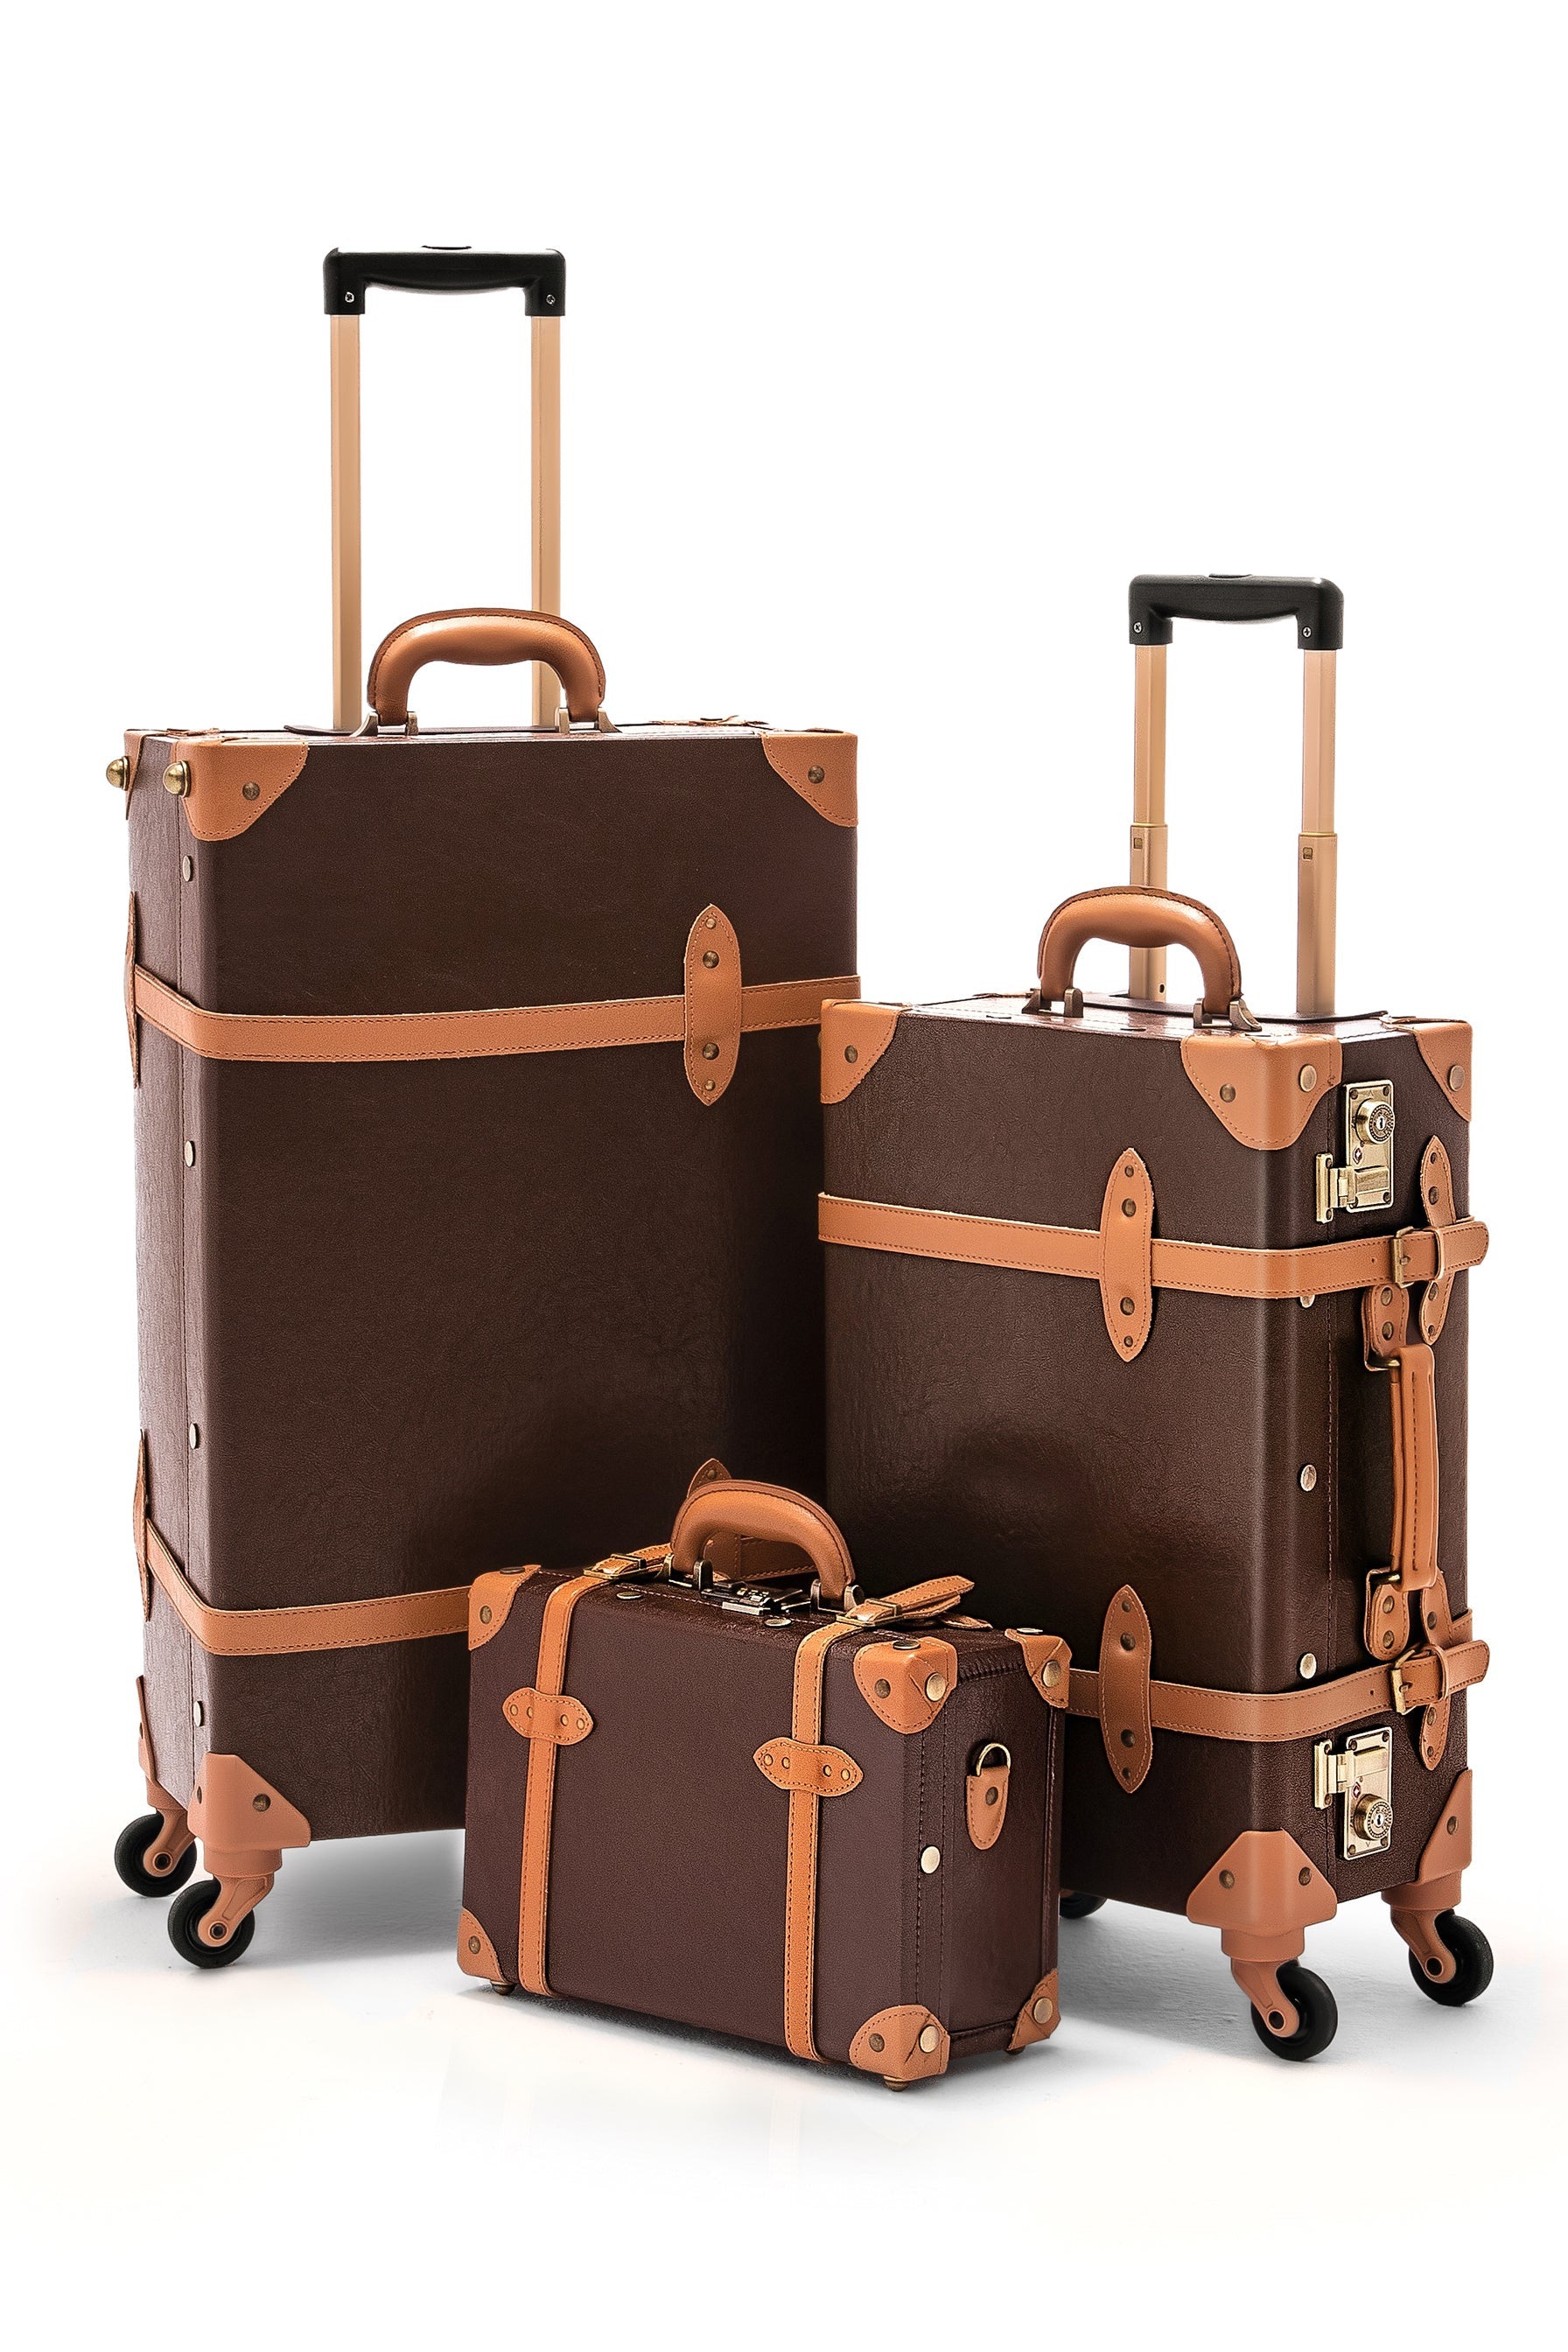 Minimalism 3 Pieces Luggage Set - Cocoa Brown's